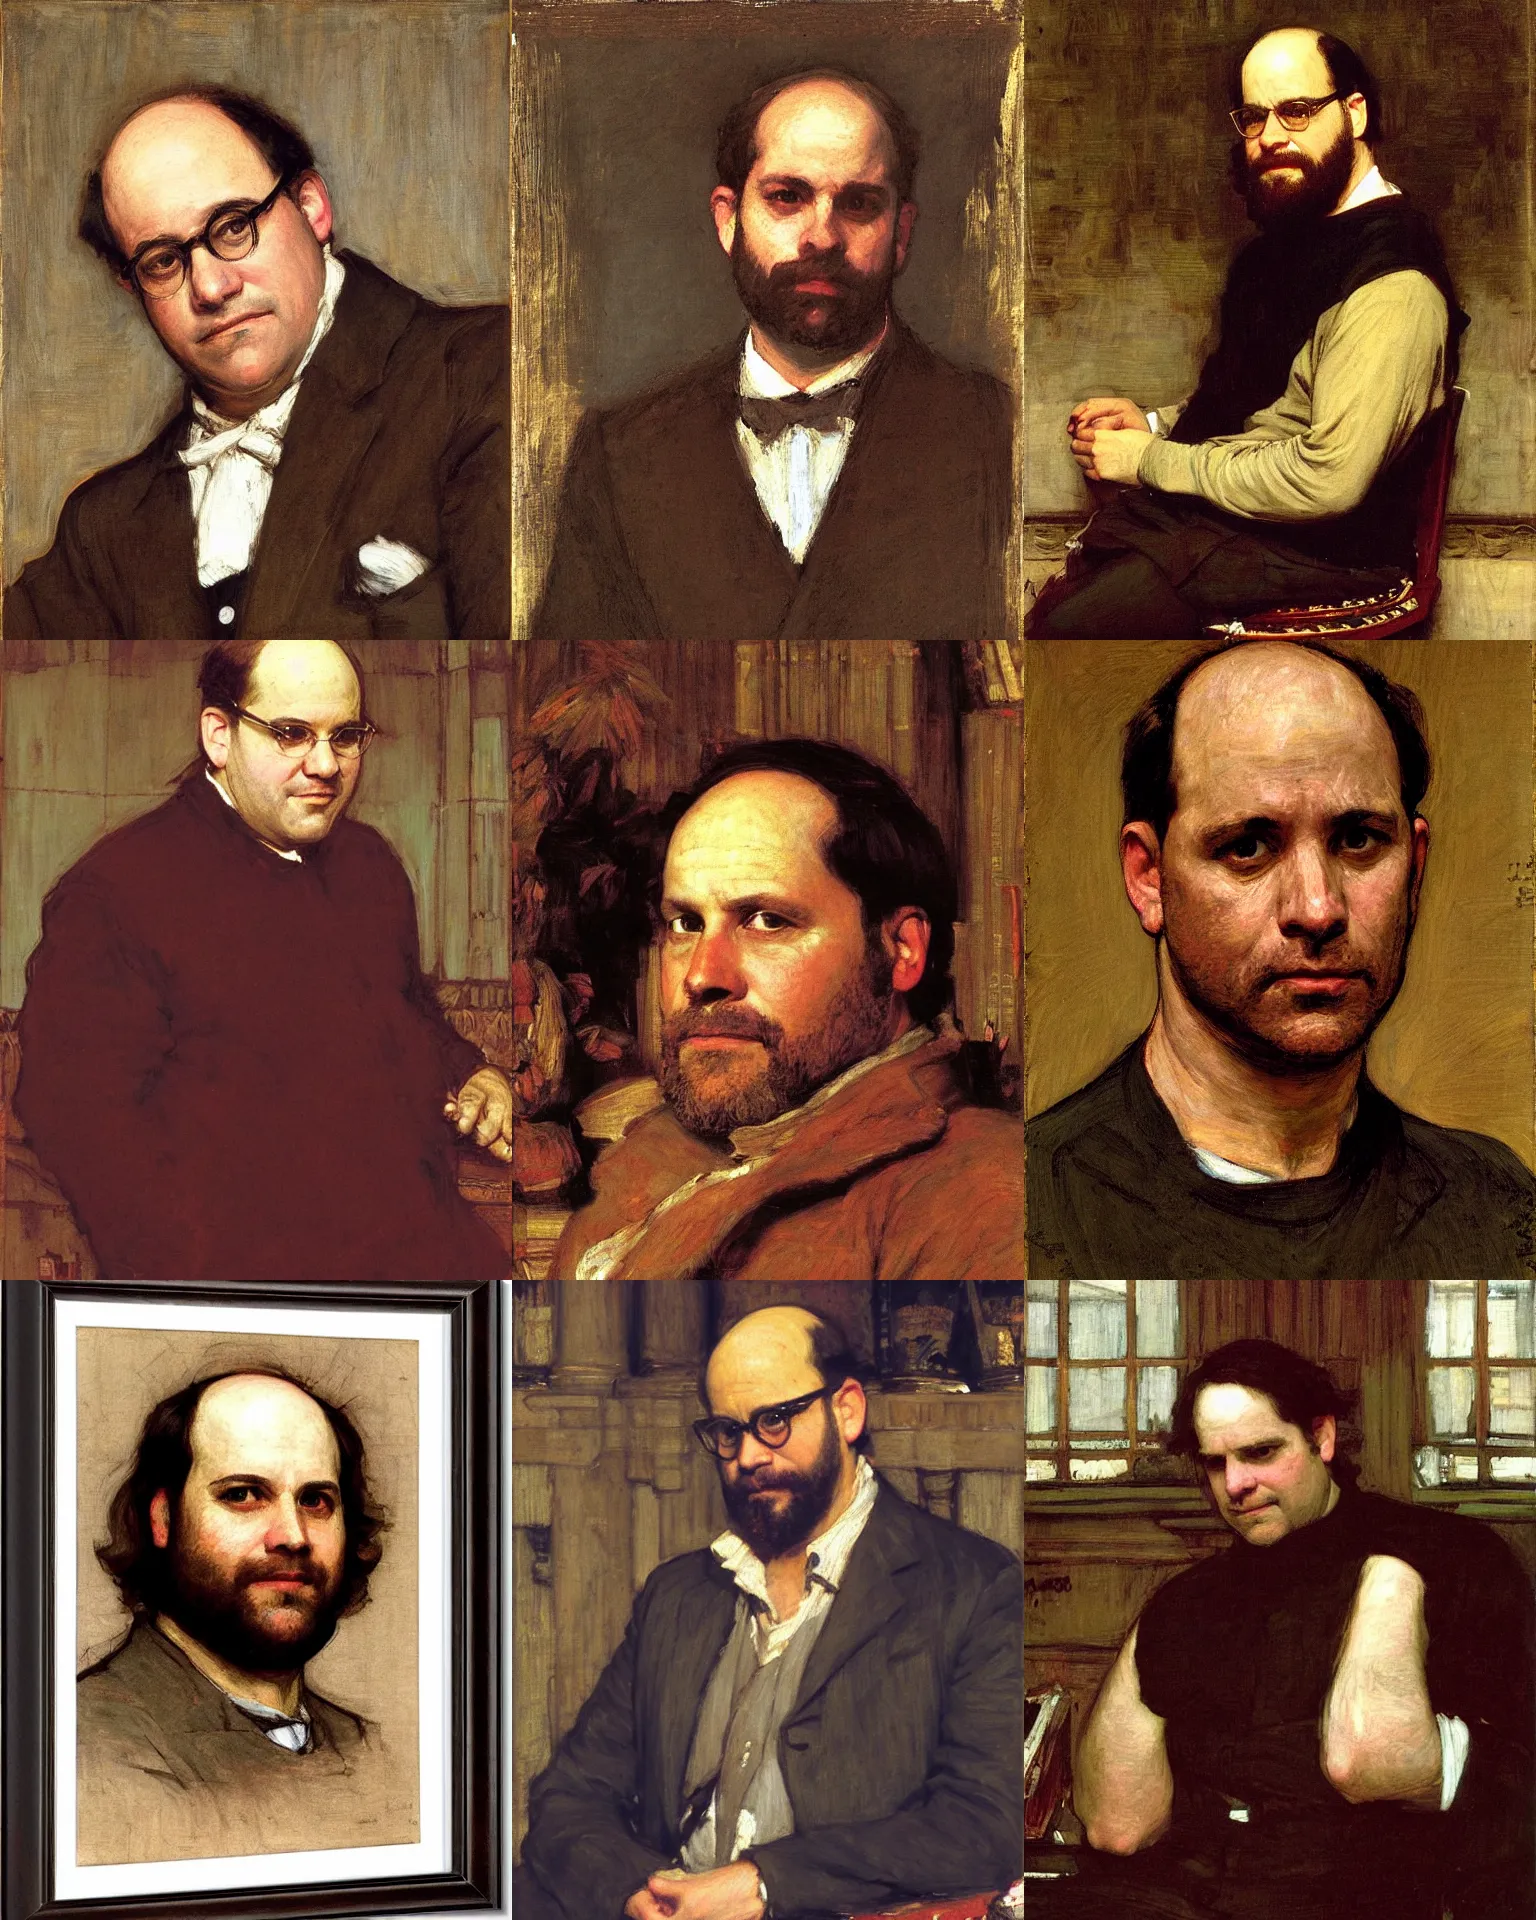 Prompt: A portrait of George Costanza, by John William Waterhouse